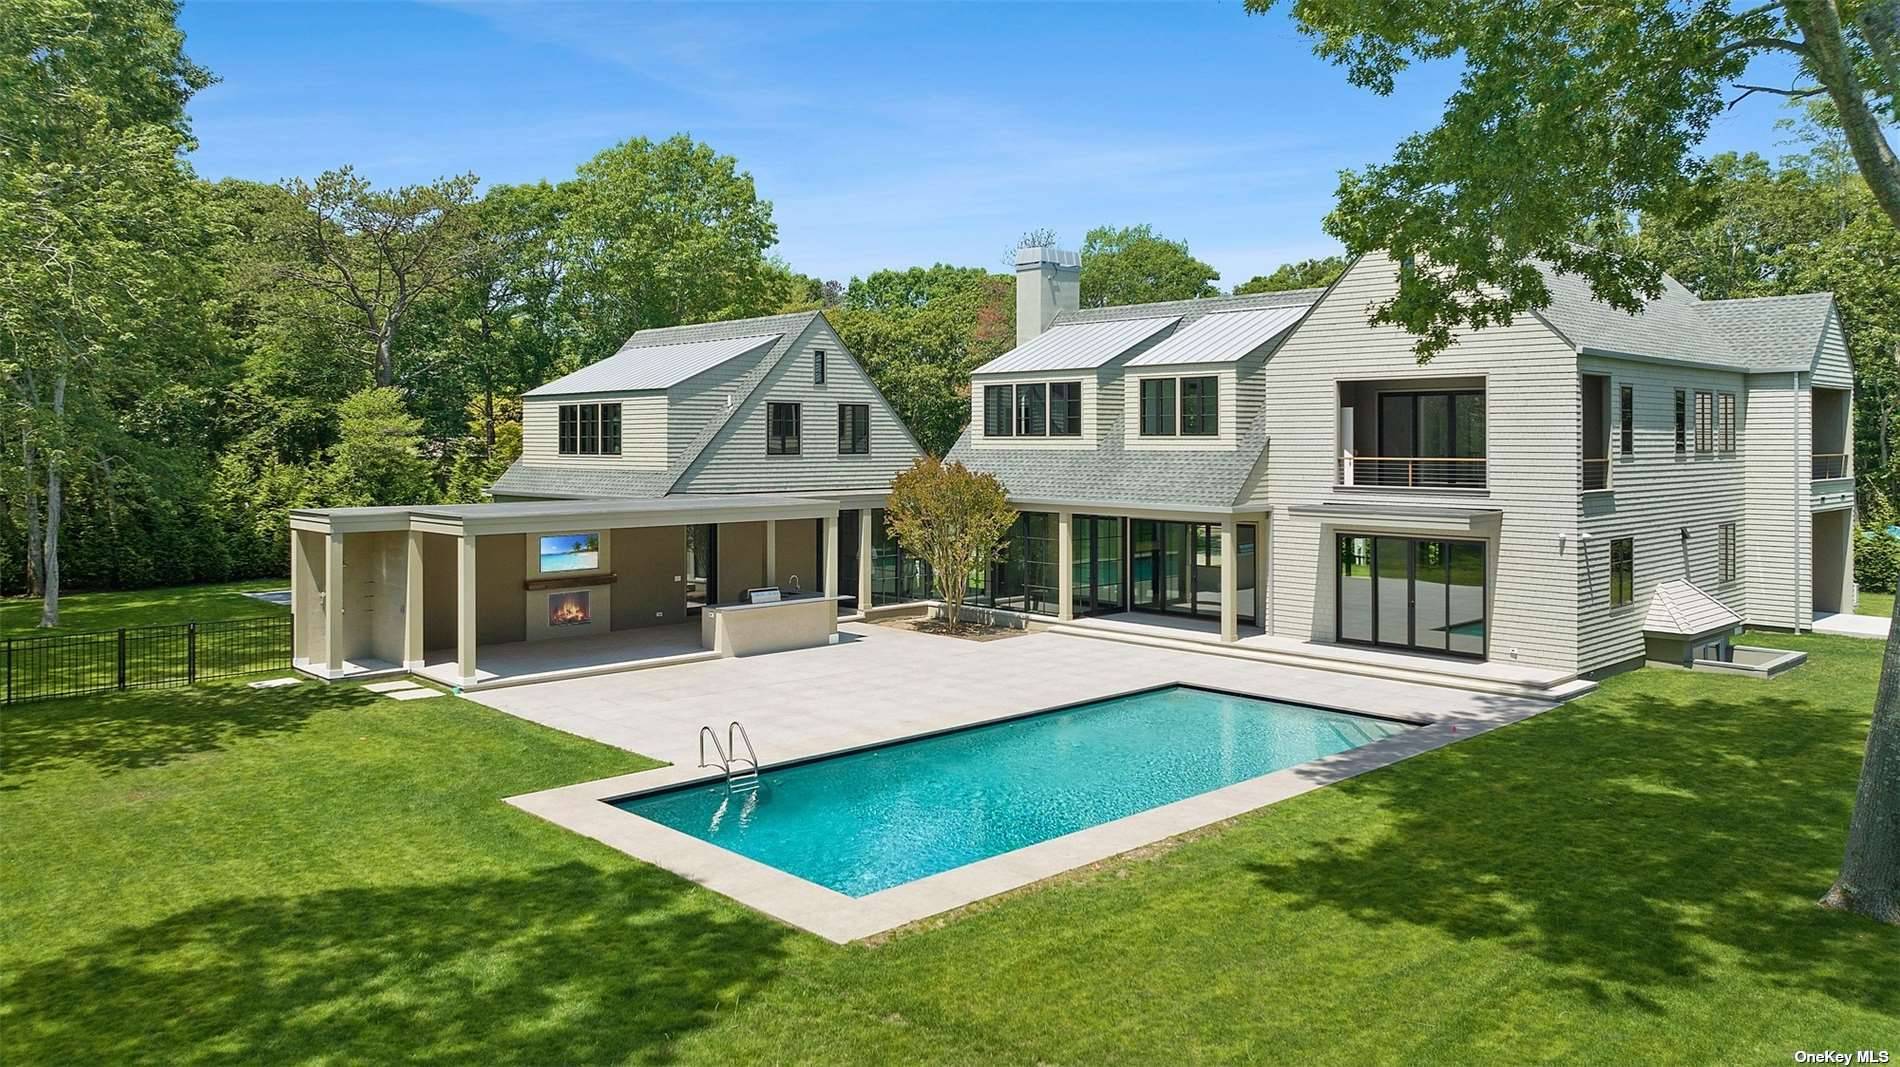 Welcome to this Quogue Village Stunner, a 5, 550 sq.